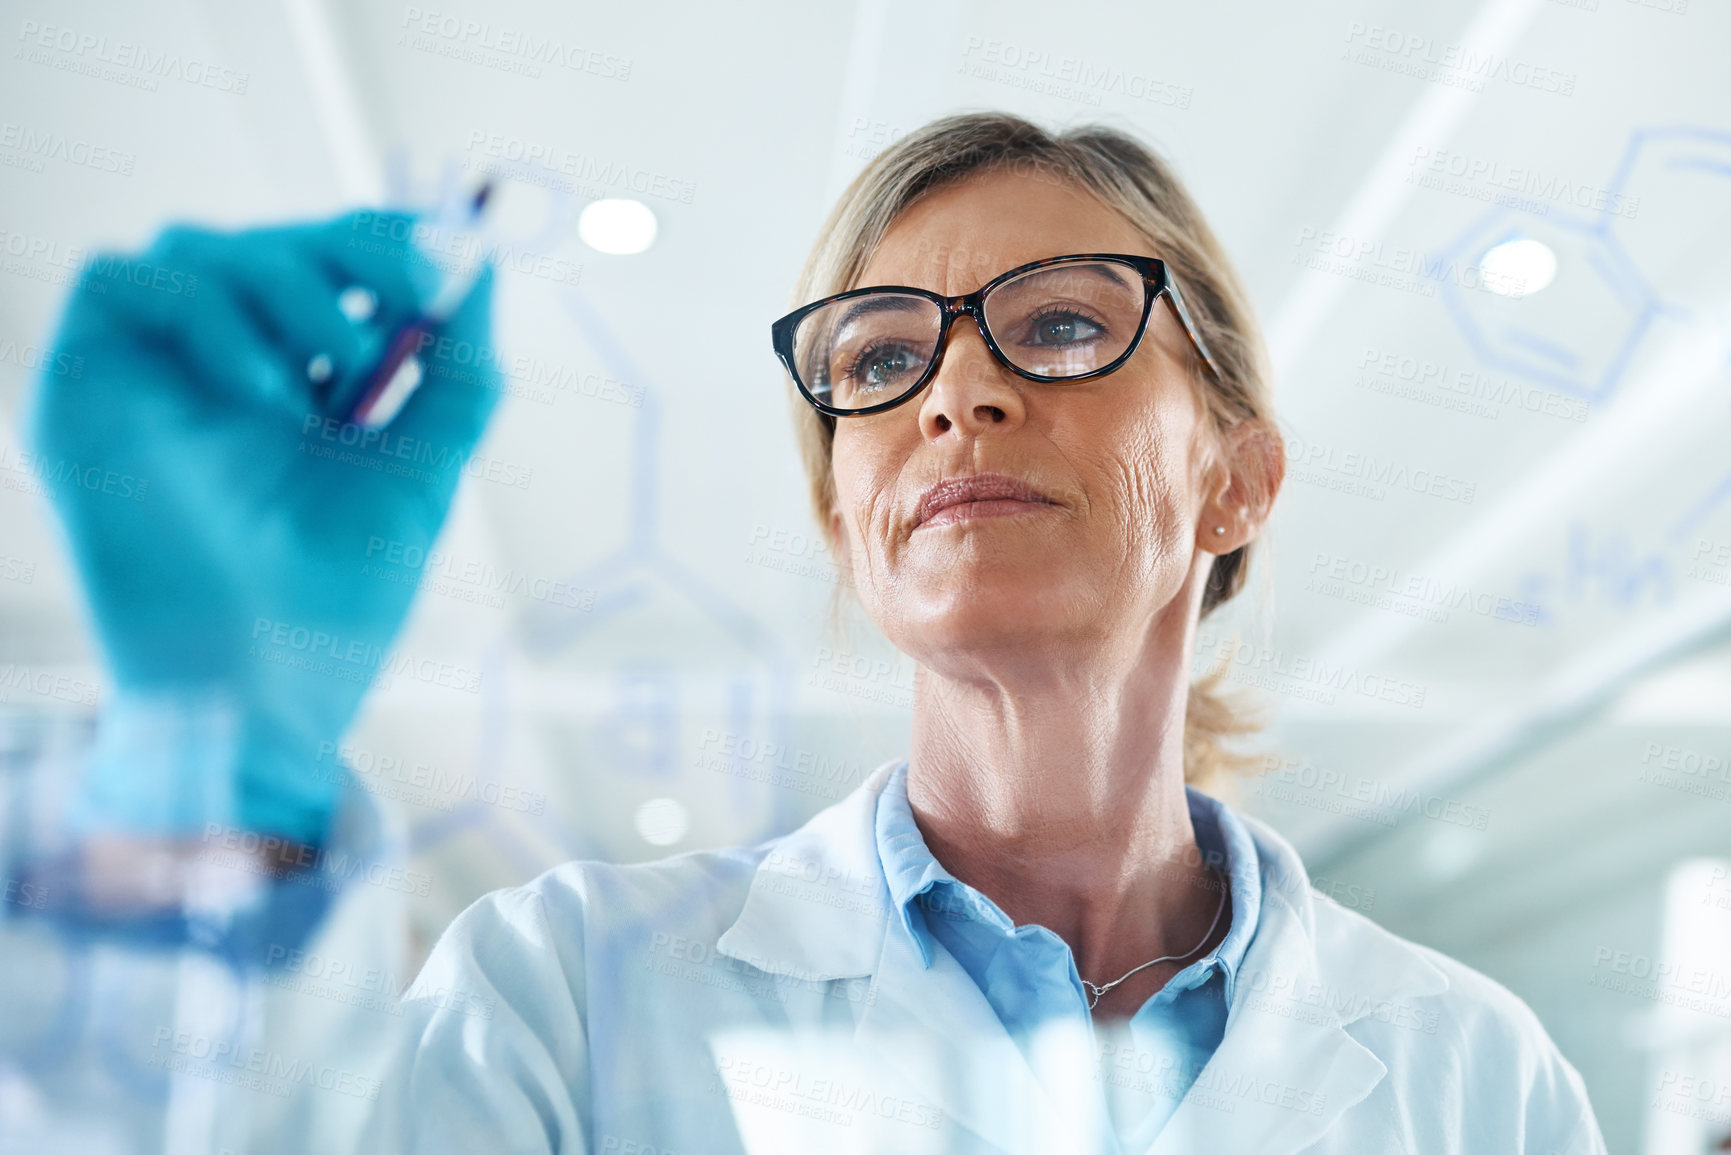 Buy stock photo Shot of a mature scientist drawing molecular structures on a glass wall in a lab